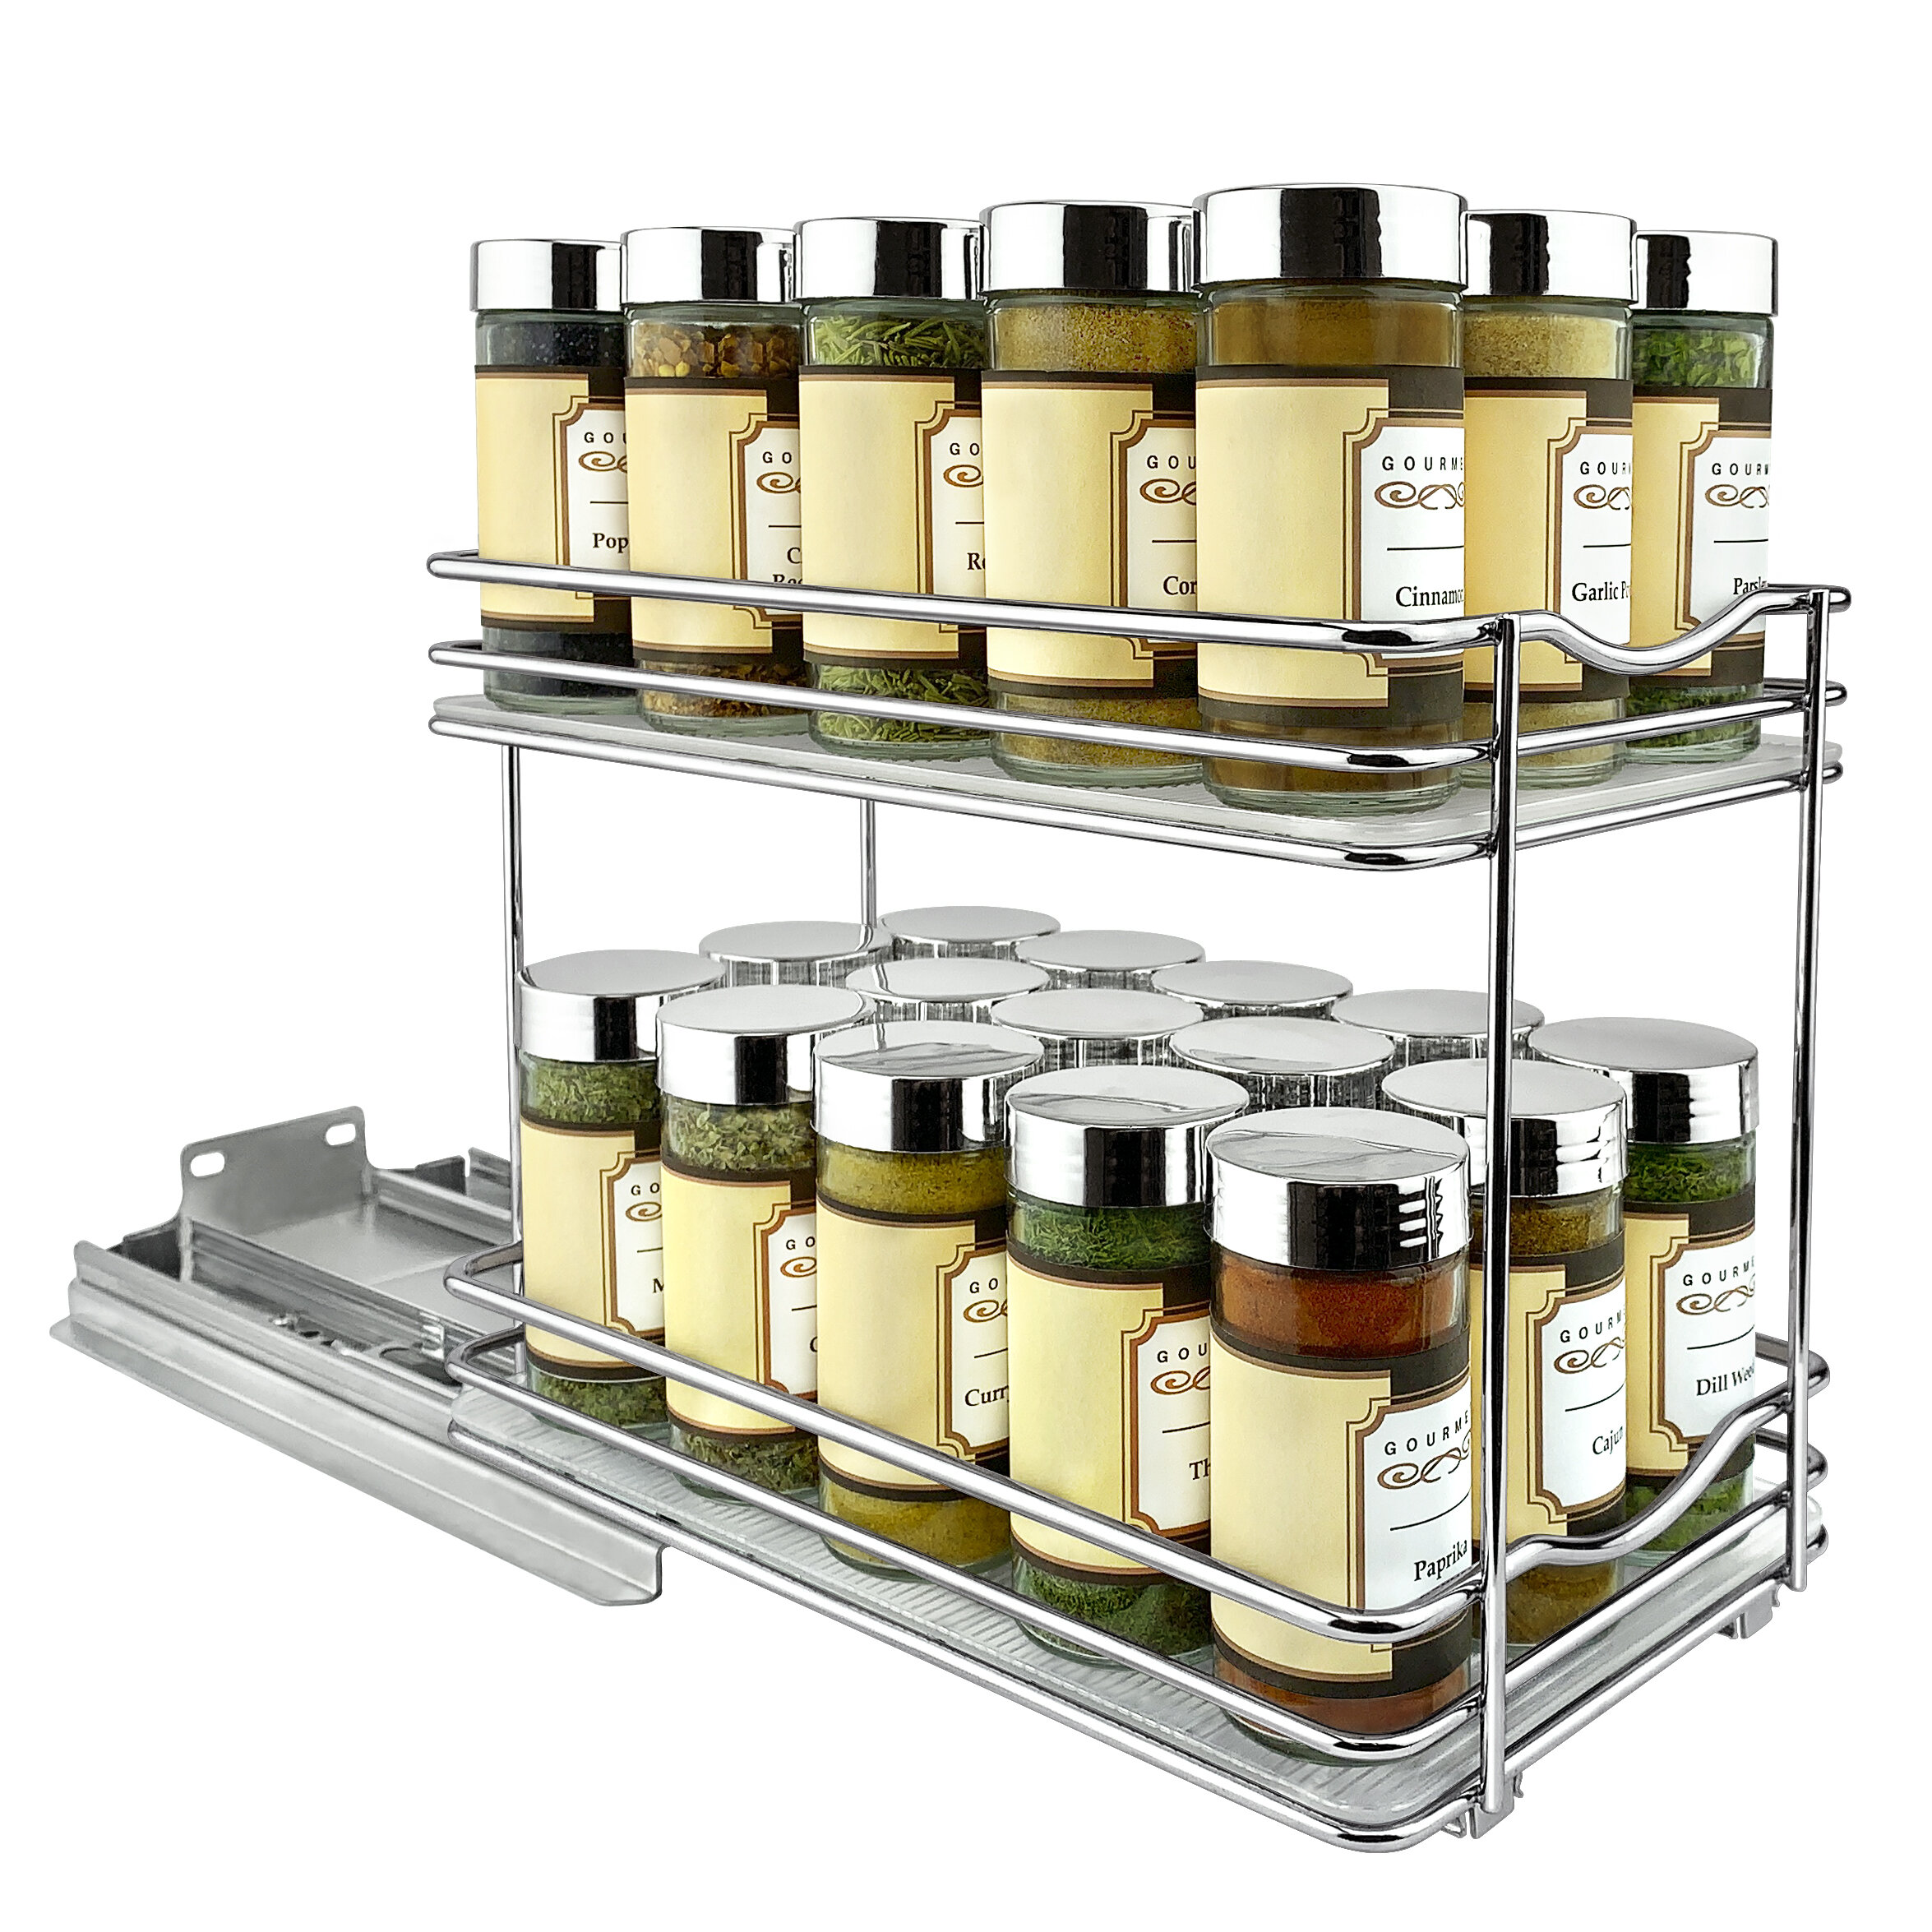 YBING Can Rack Organizer 7 Tier Can Storage Dispenser Holds up to 84 Cans  for Food Storage Can Storage Rack Holders for Kitchen Cabinet or Pantry